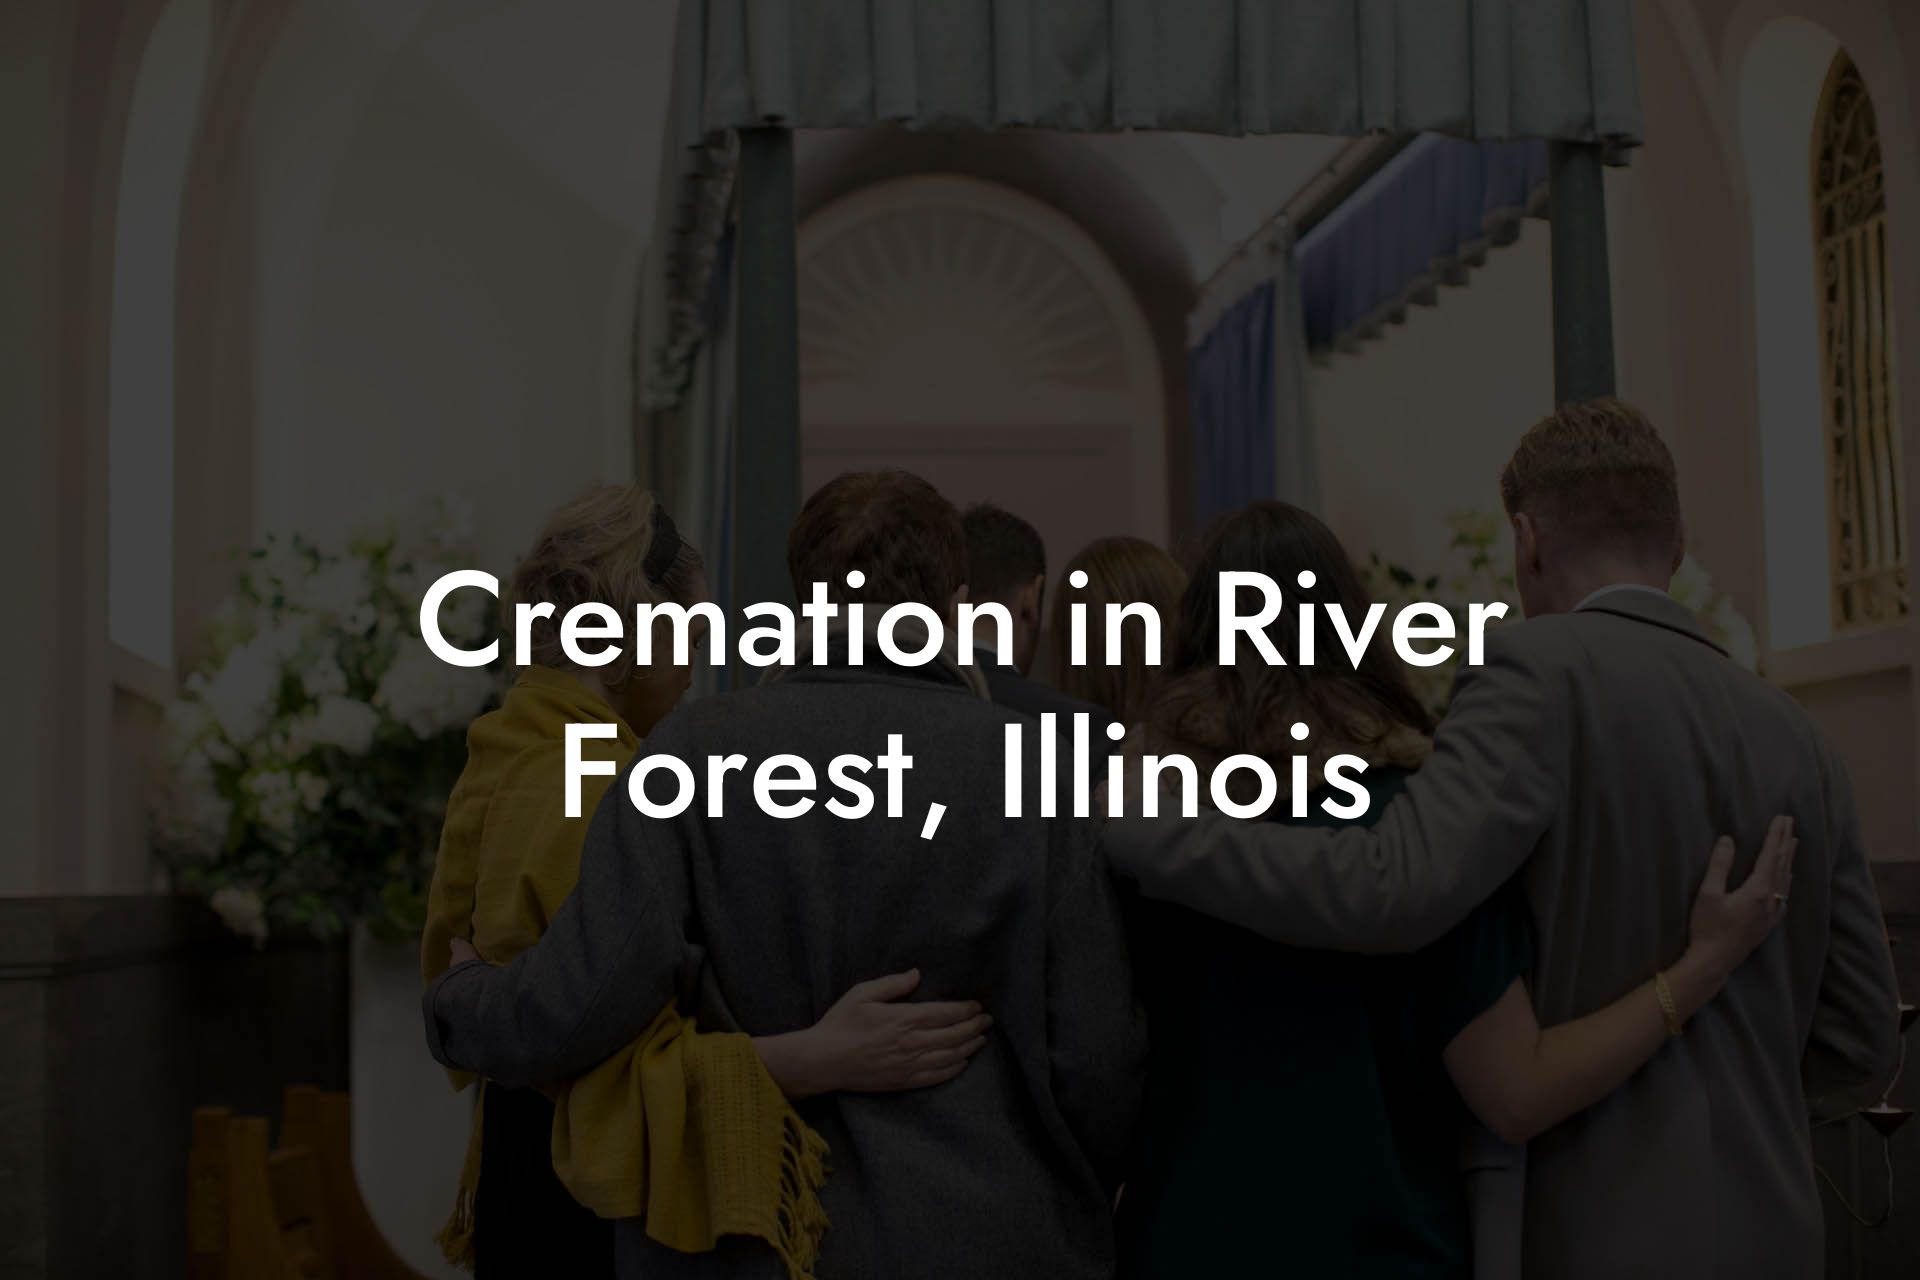 Cremation in River Forest, Illinois